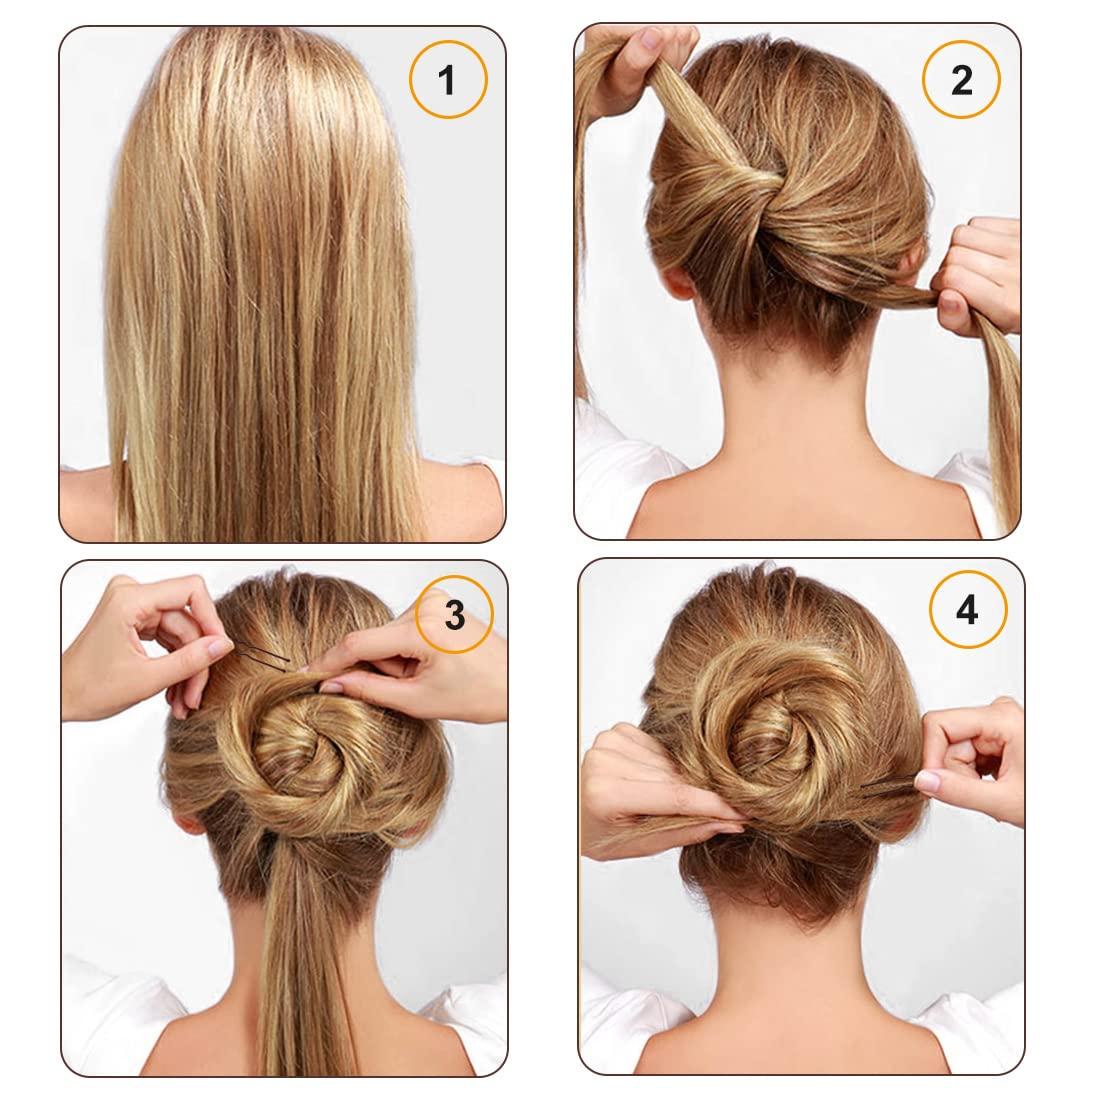 Pin on HAIR STYLING